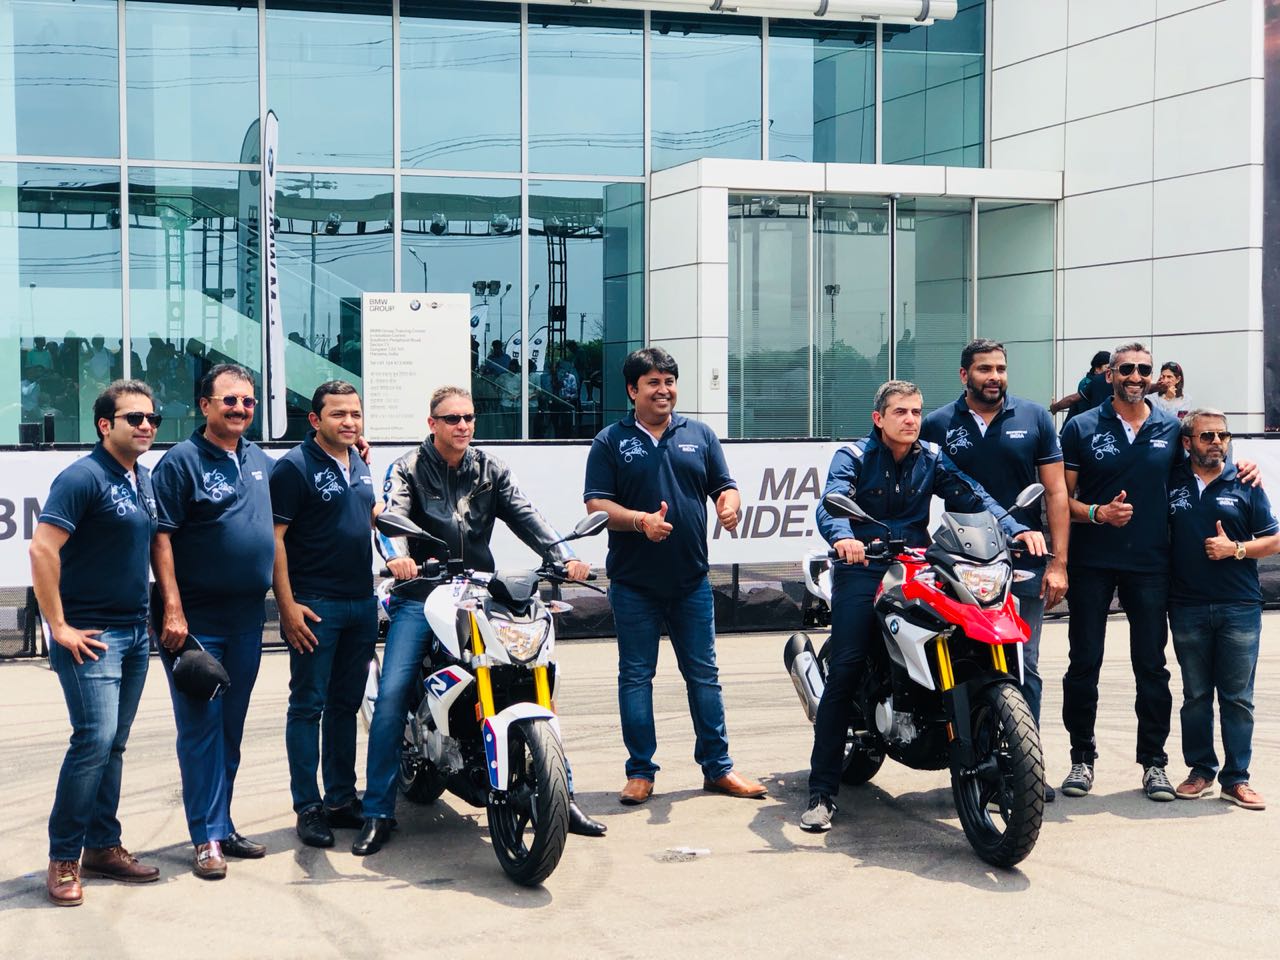 <p><a href="http://overdrive.in/news-cars-auto/official-bmw-motorrad-india-launches-g-310-r-and-g-310-gs-motorcycles-at-rs-2-99-and-rs-3-49-lakh/">PRICES OUT: The G 310 R is priced at Rs 2.99 lakh and the G 310 GS will cost 3.49 lakh. All prices ex-showroom.</a></p>